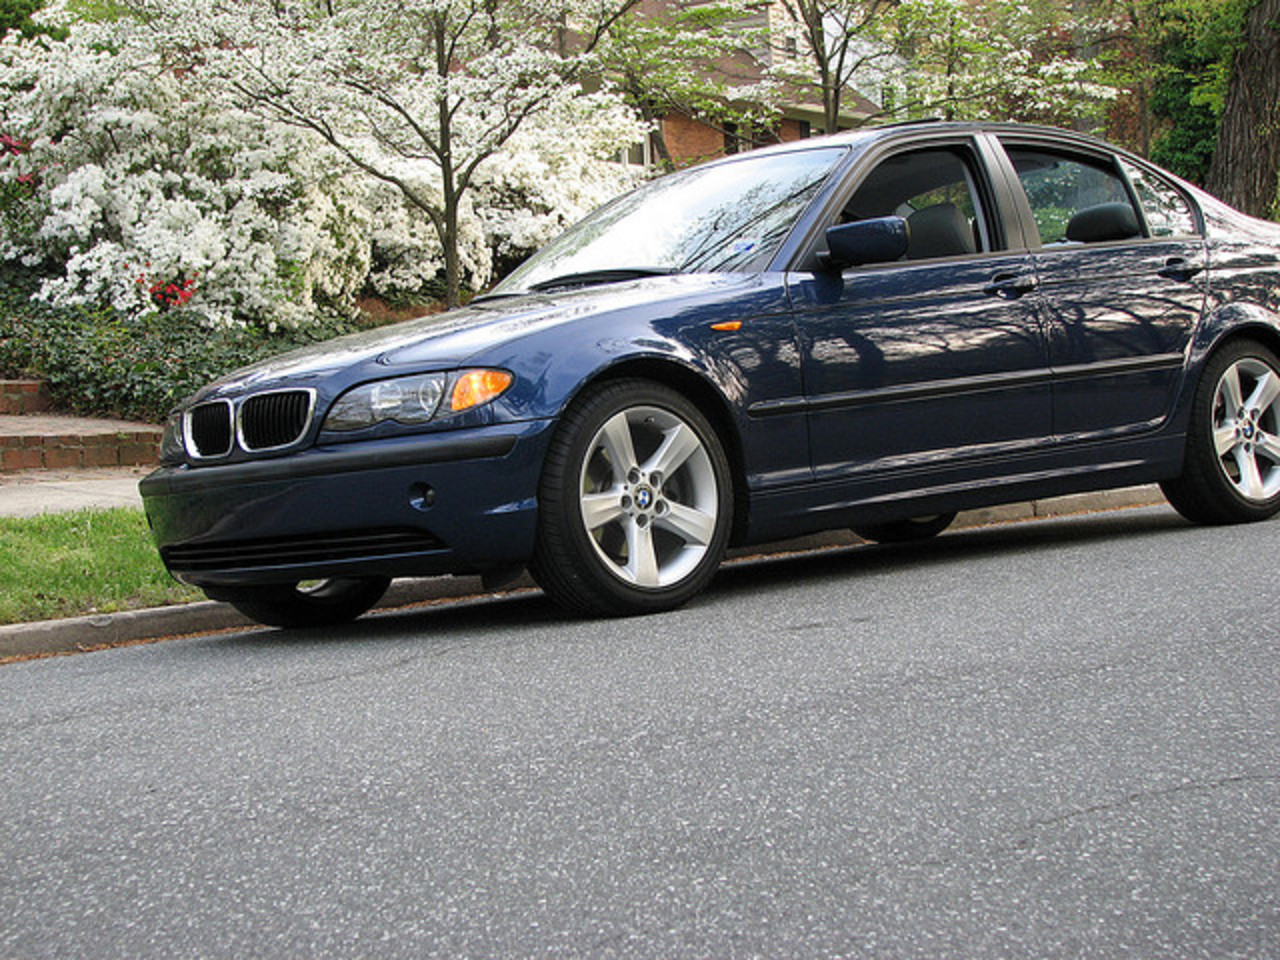 2005 BMW 325is. | Flickr - Photo Sharing!